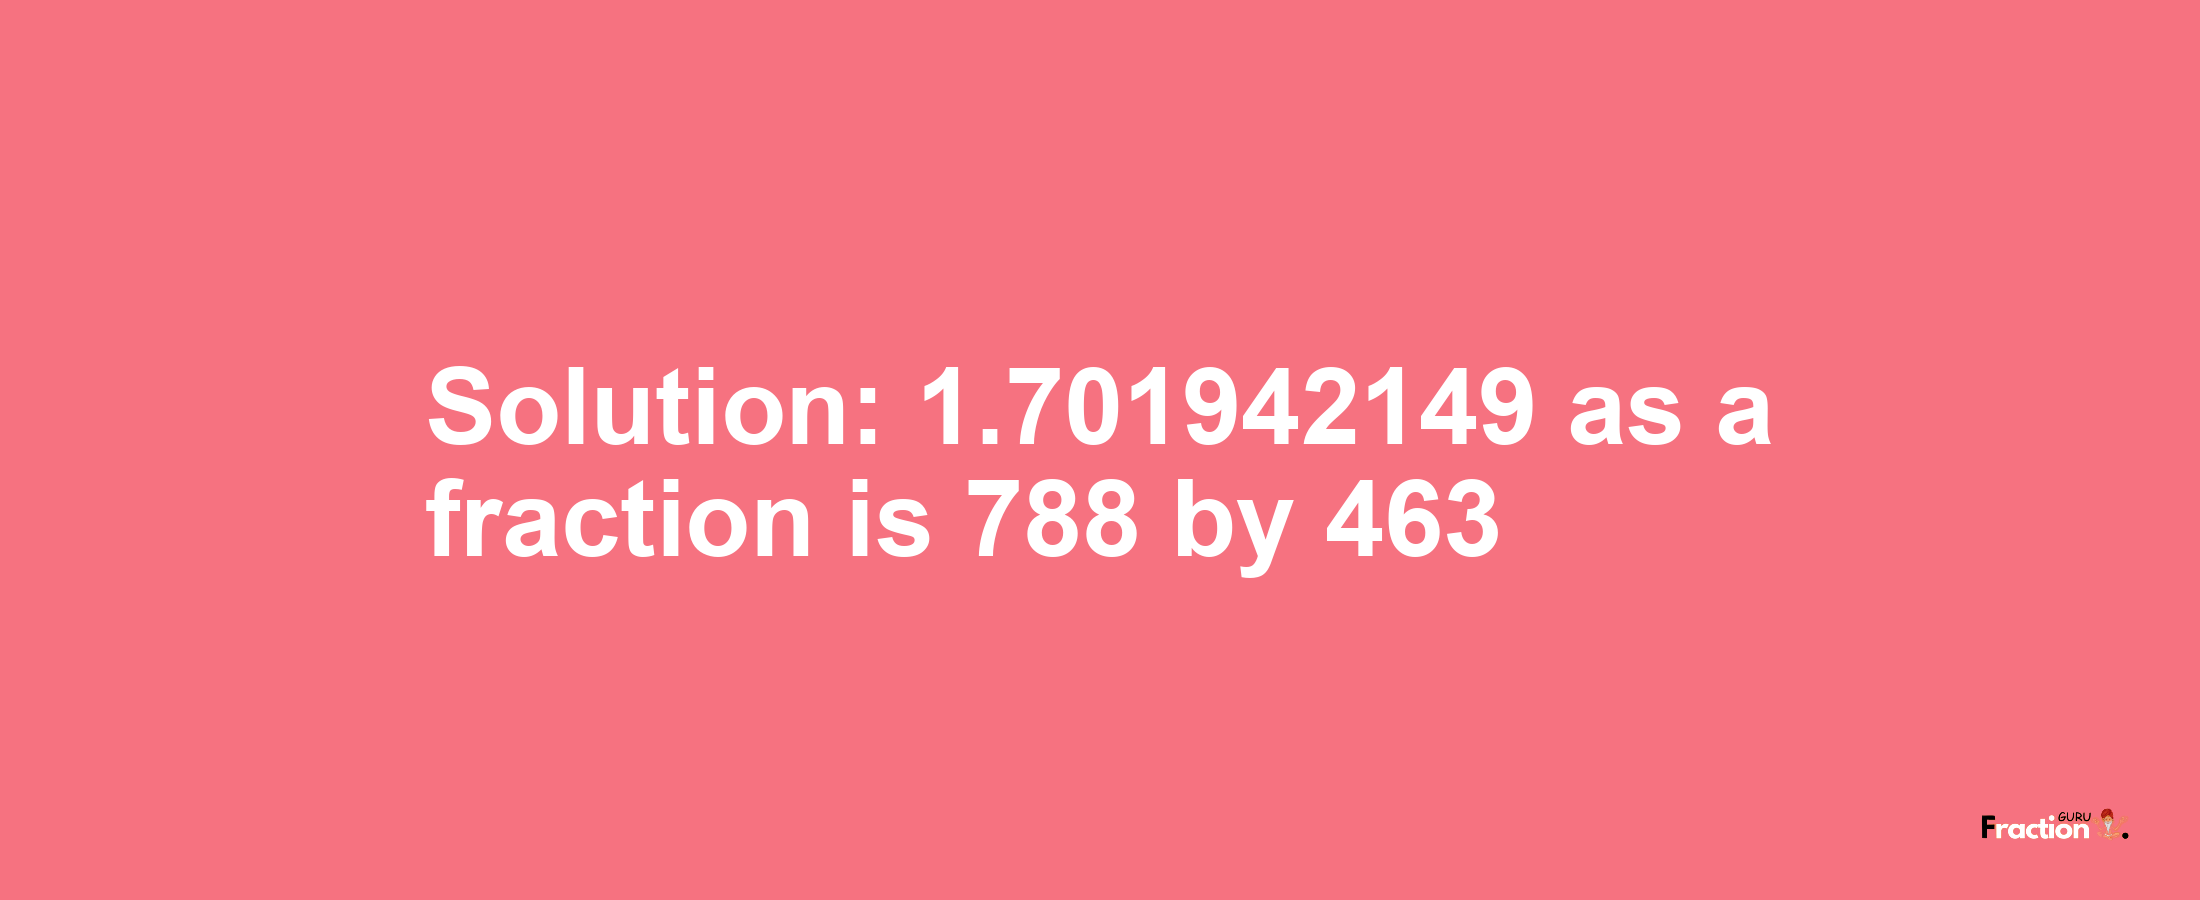 Solution:1.701942149 as a fraction is 788/463